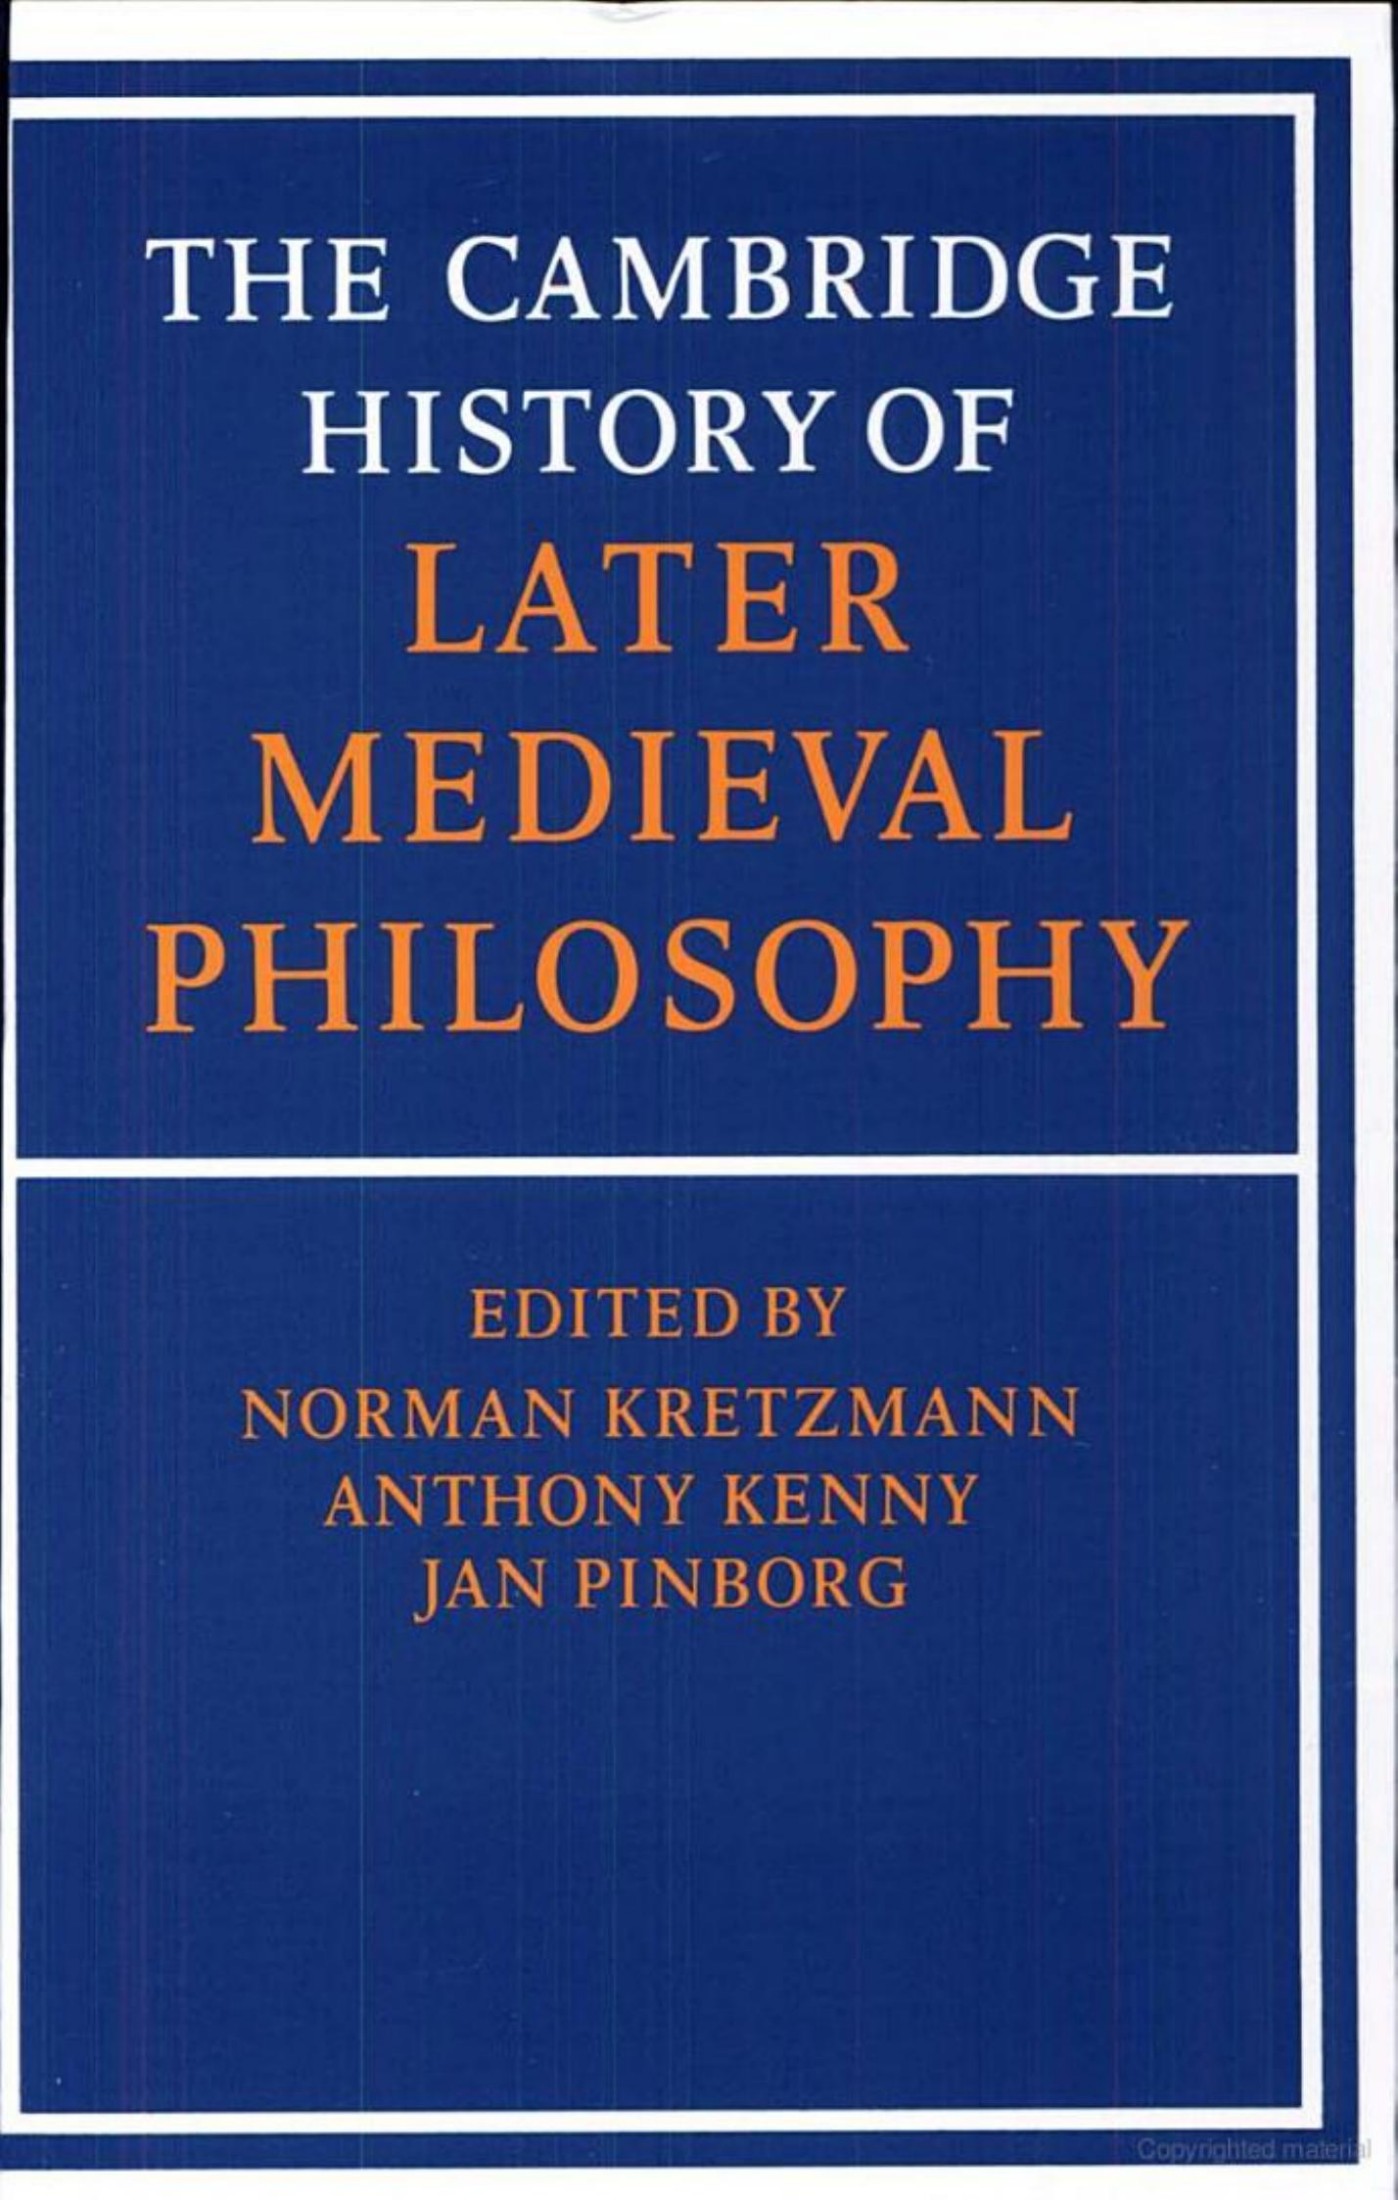 The Cambridge History of Later Medieval Philosophy: From the Rediscovery of Aristotle to the Disintegration of Scholasticism, 1100-1600